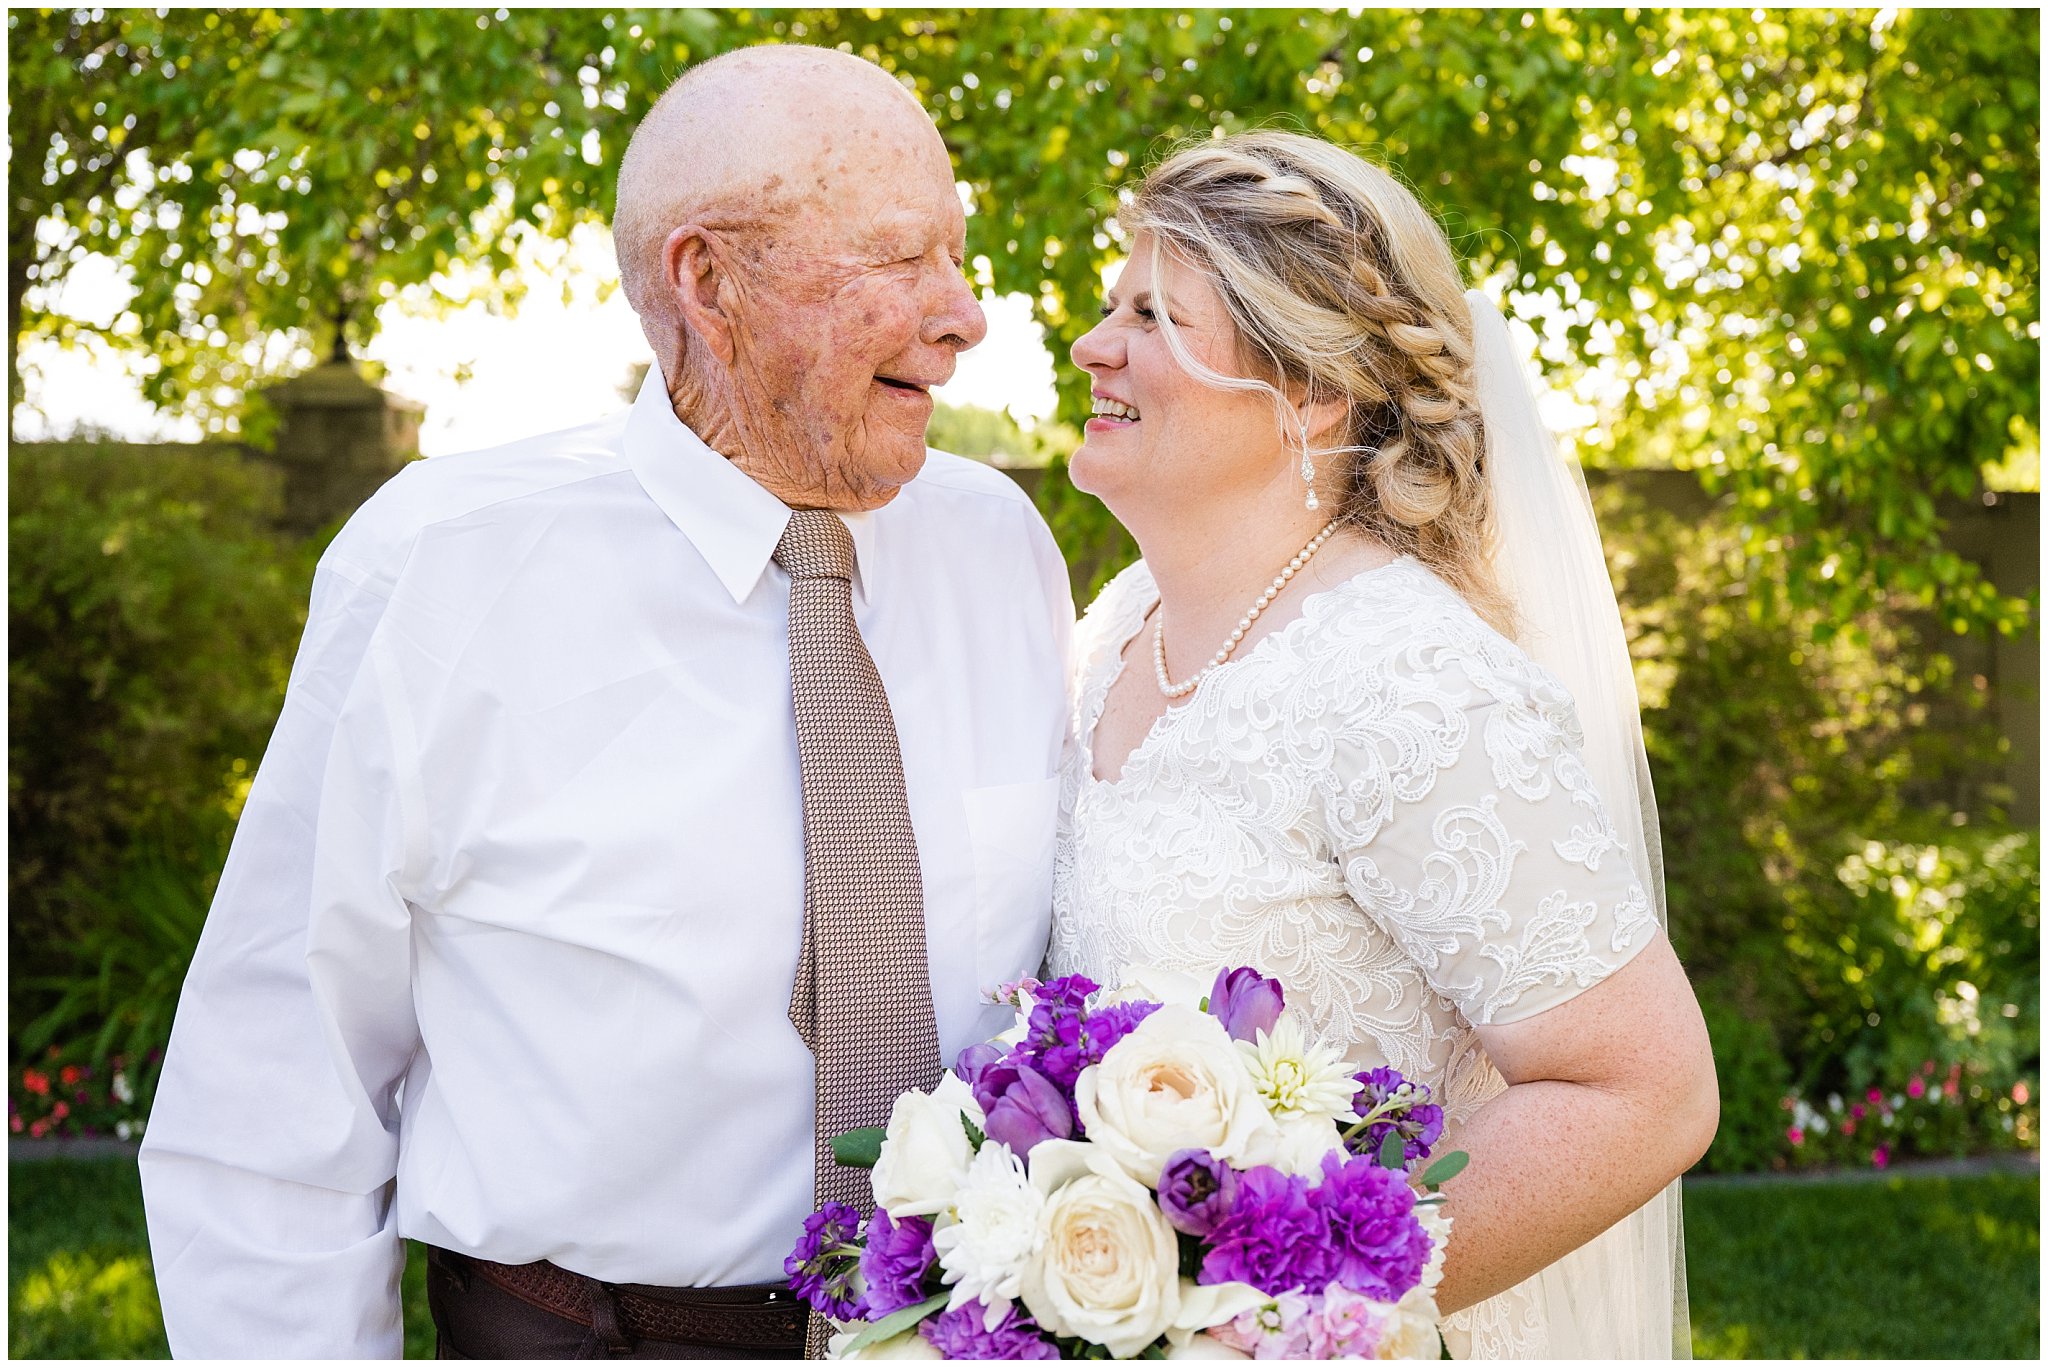 Bride and groom with wedding party and family | Oquirrh Mountain Temple and Millennial Falls Wedding | Jessie and Dallin Photography